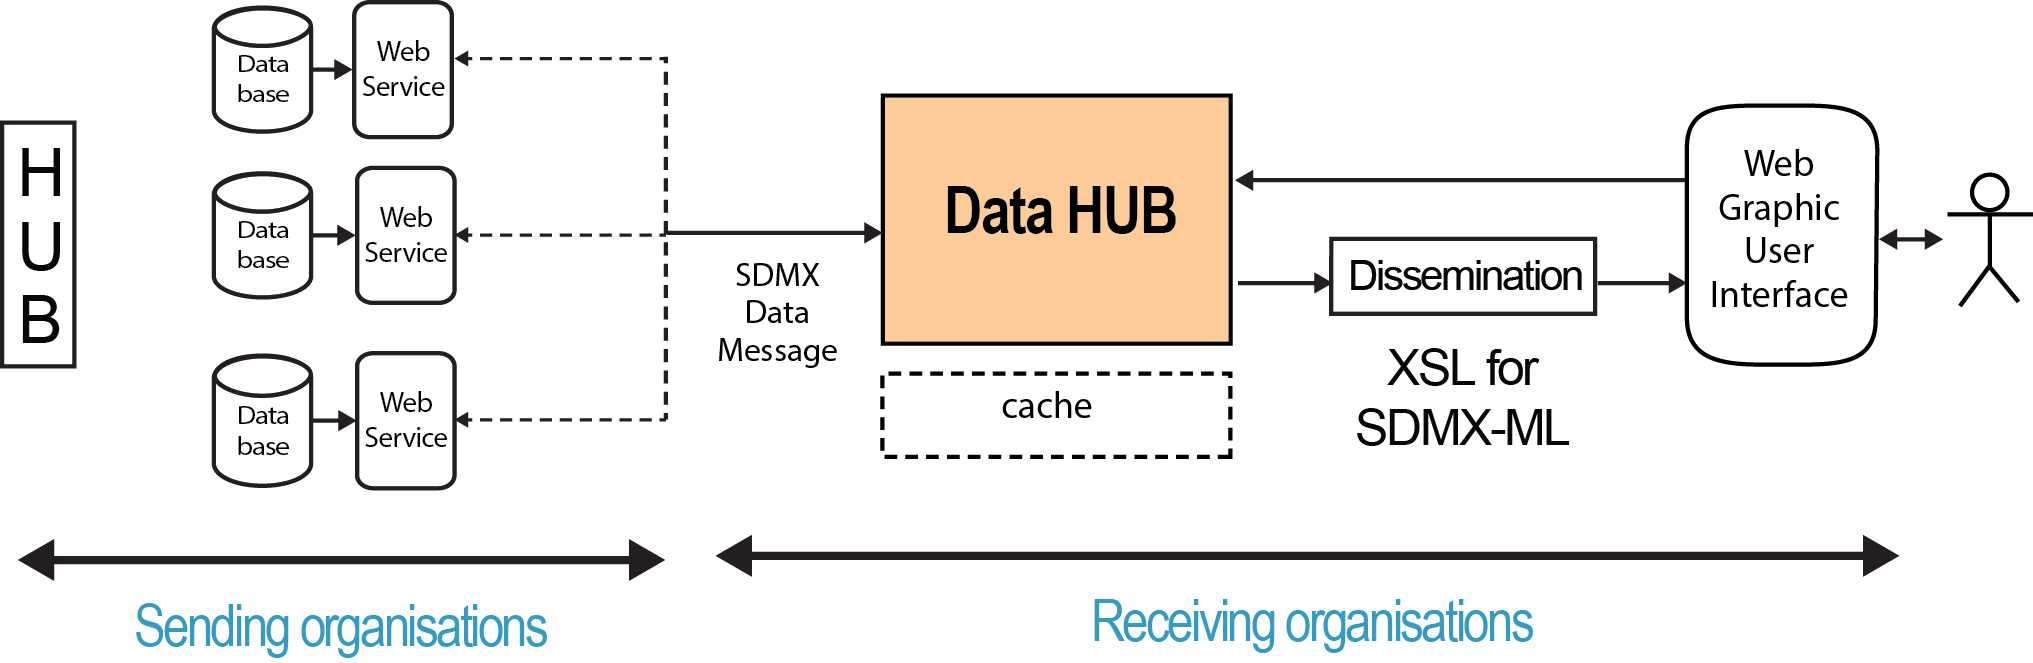 This flow diagram shows that in the data hub architecture, sending organisations make their data available via SDMX-compliant web services. Receiving organisations set up a data hub application for data users. Through the data hub’s graphical user interface, users can dynamically query and view the data they need from the SDMX-compliant web services made available by the sending organisations.